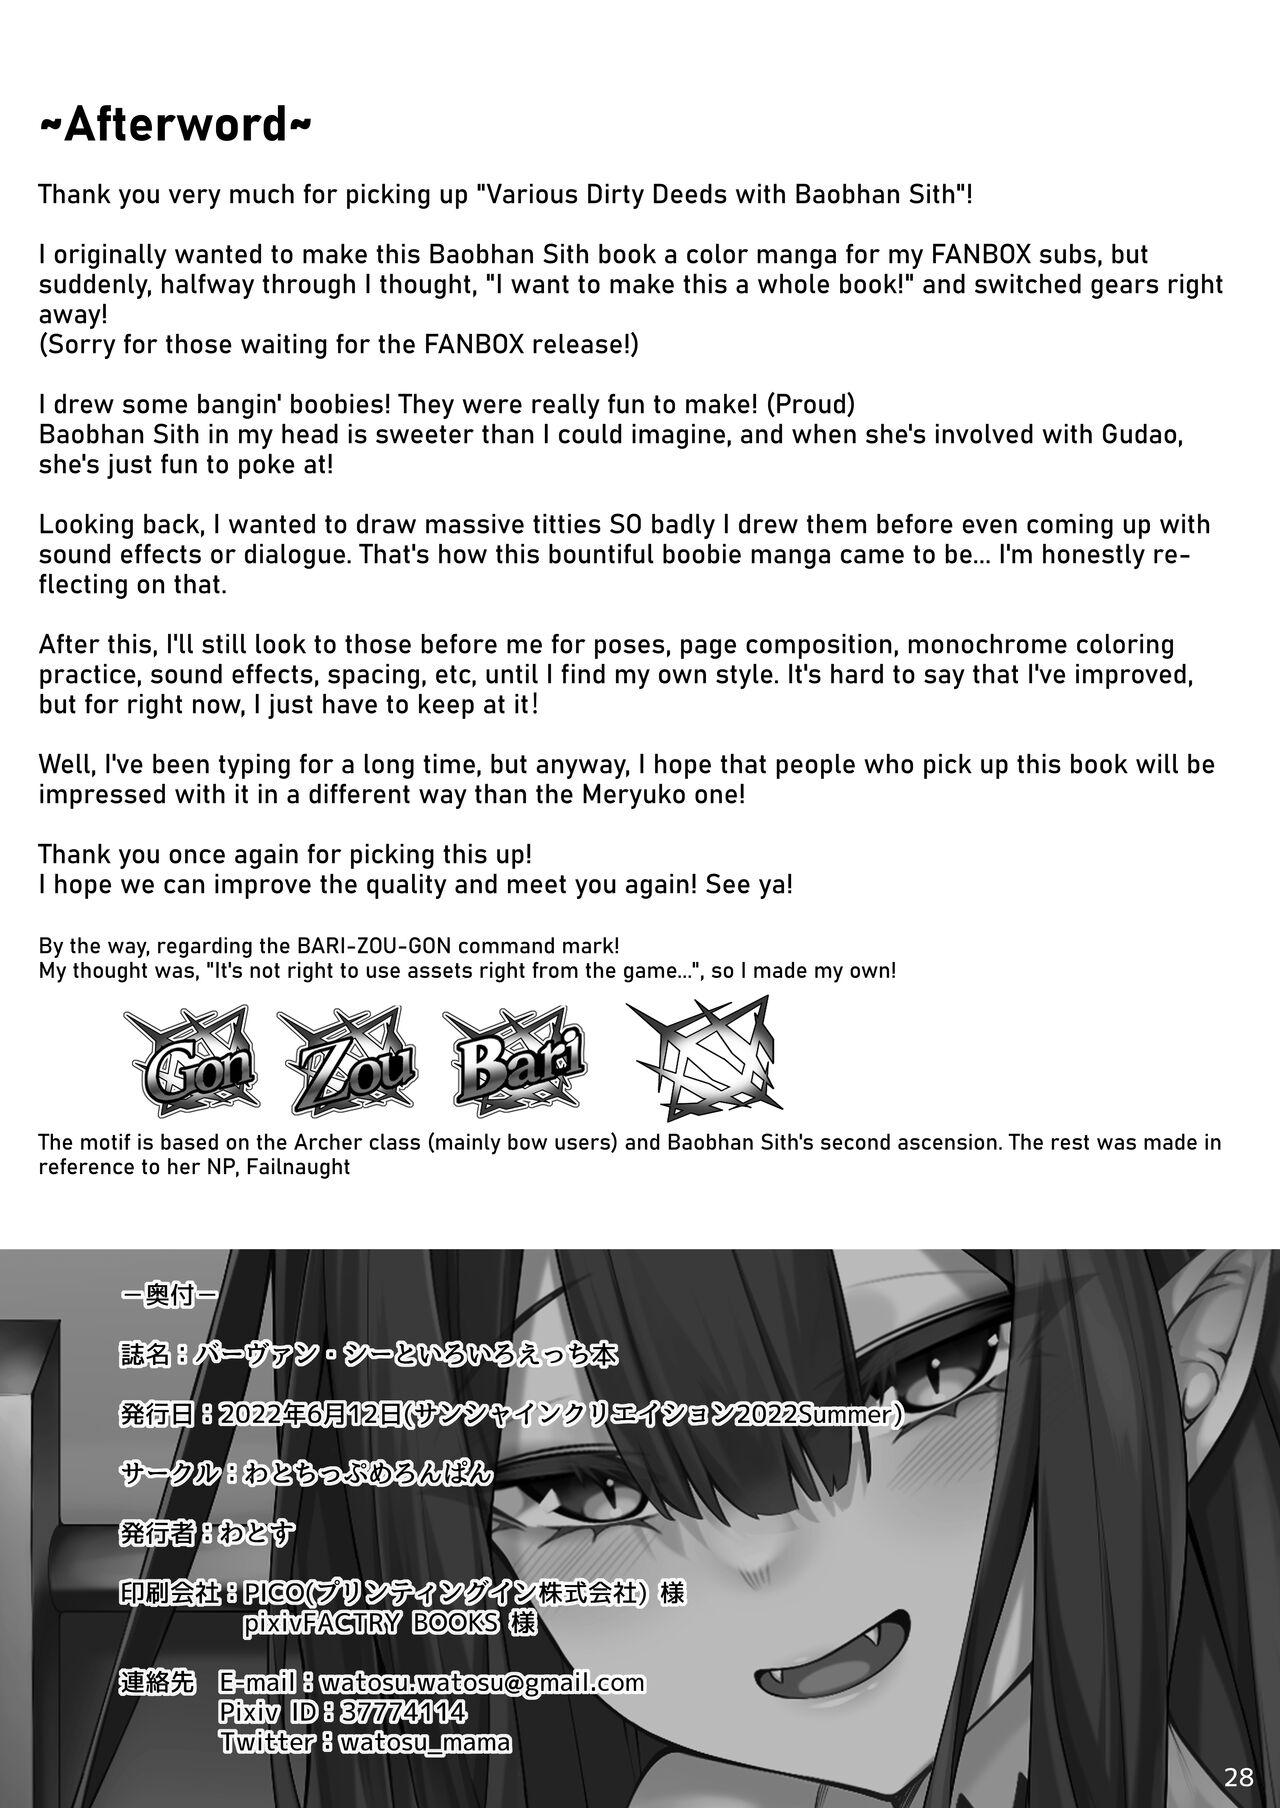 Busty Baobhan Sith to Iroiro Ecchi Hon | Various Dirty Deeds with Baobhan Sith - Fate grand order Pussyfucking - Page 28